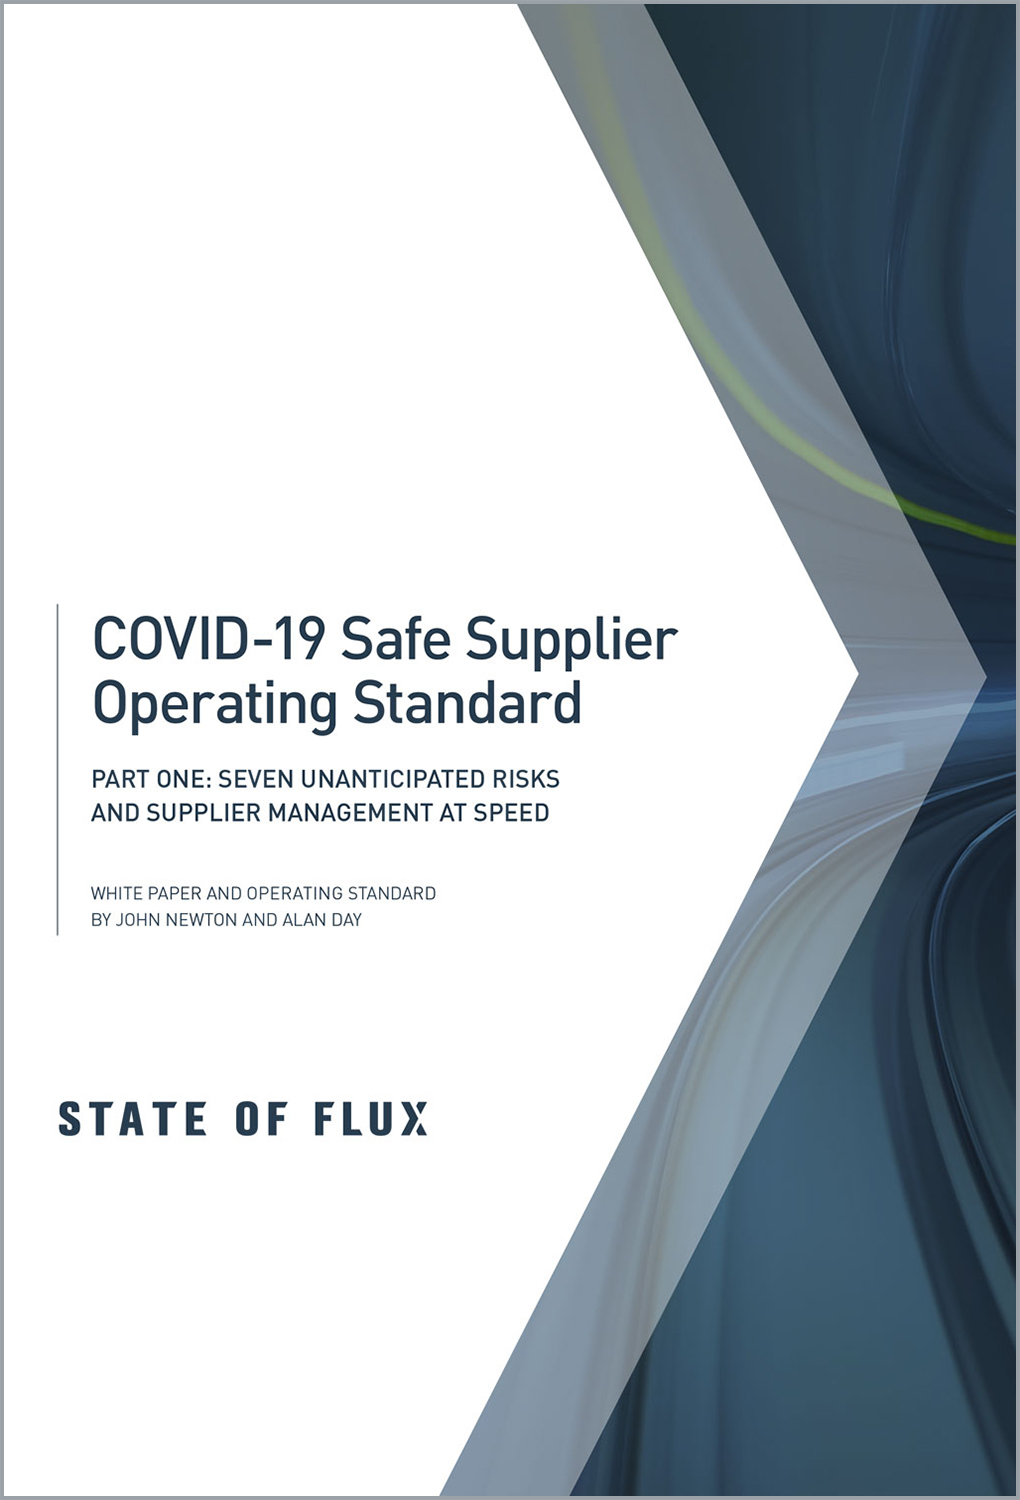 COVID-19 Safe Supplier Operating Standard - Part One